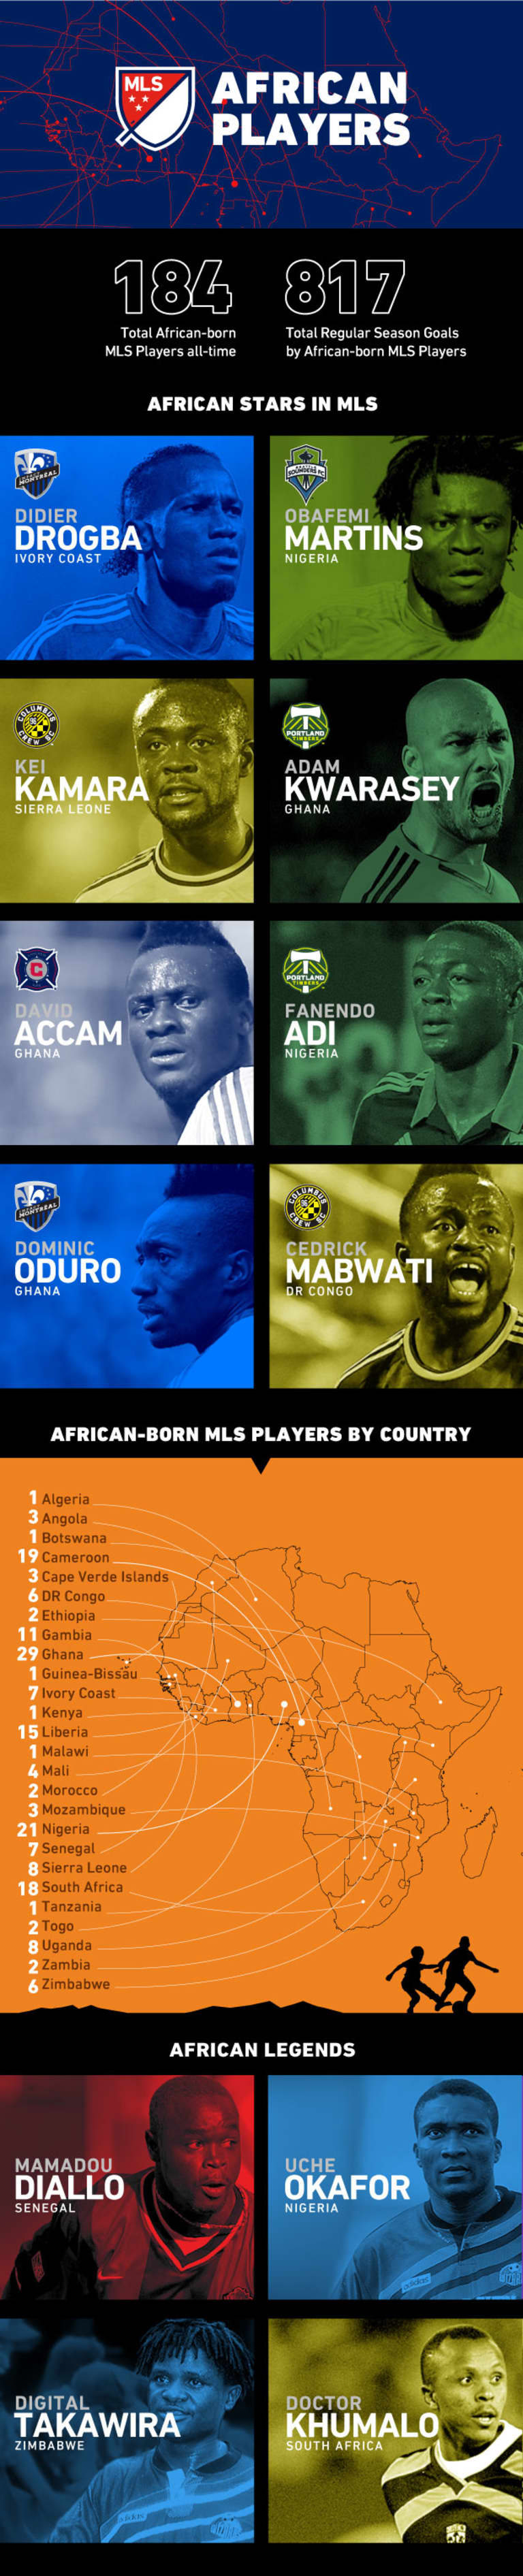 INFOGRAPHIC: African-born players through MLS history - https://league-mp7static.mlsdigital.net/images/AFRICANSMLS.jpeg?null